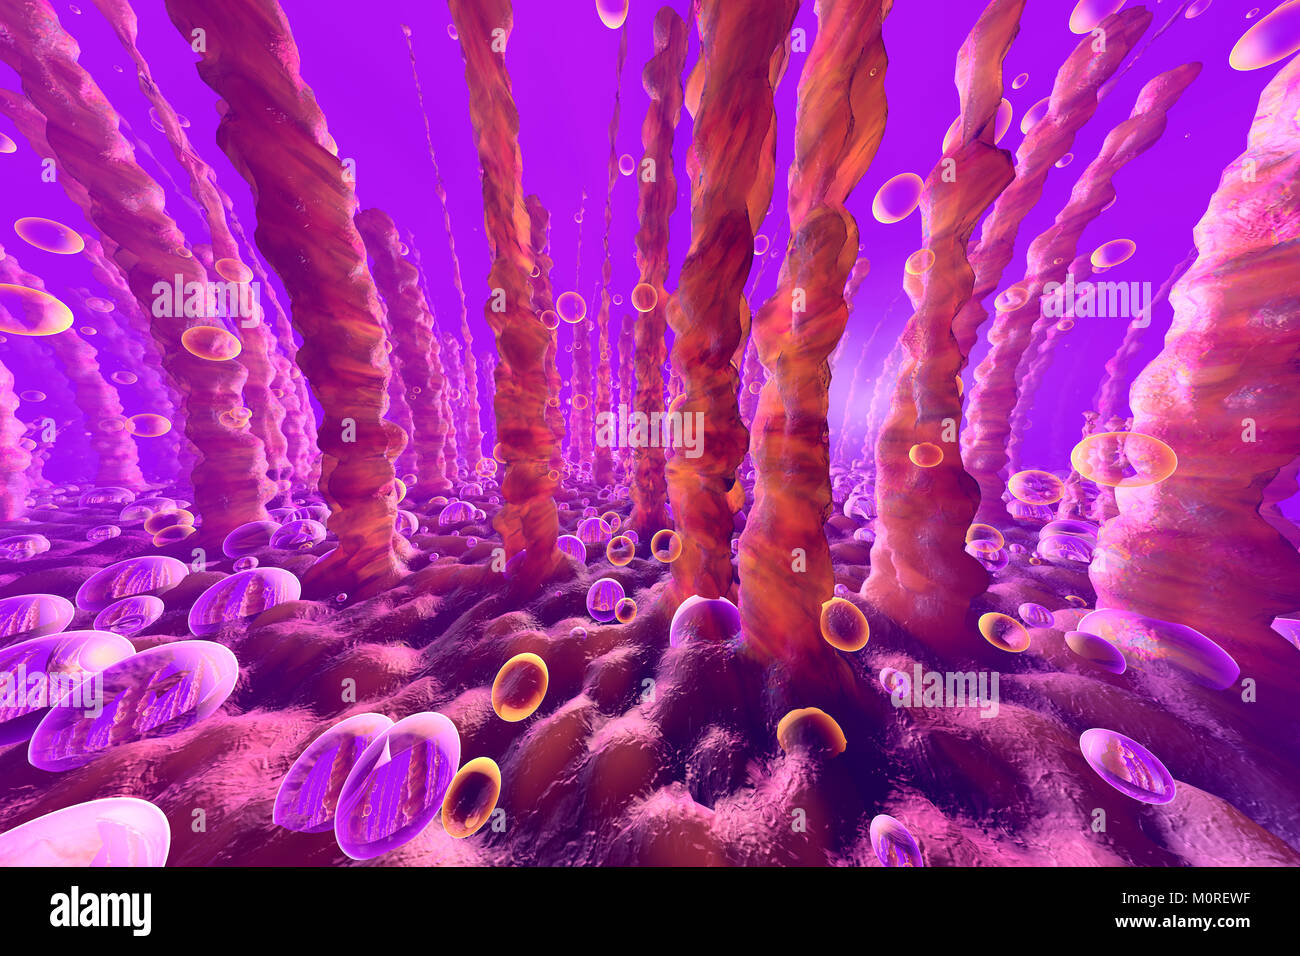 3D Illustration of lung or liver cells with oxygen bubbles floating within Stock Photo